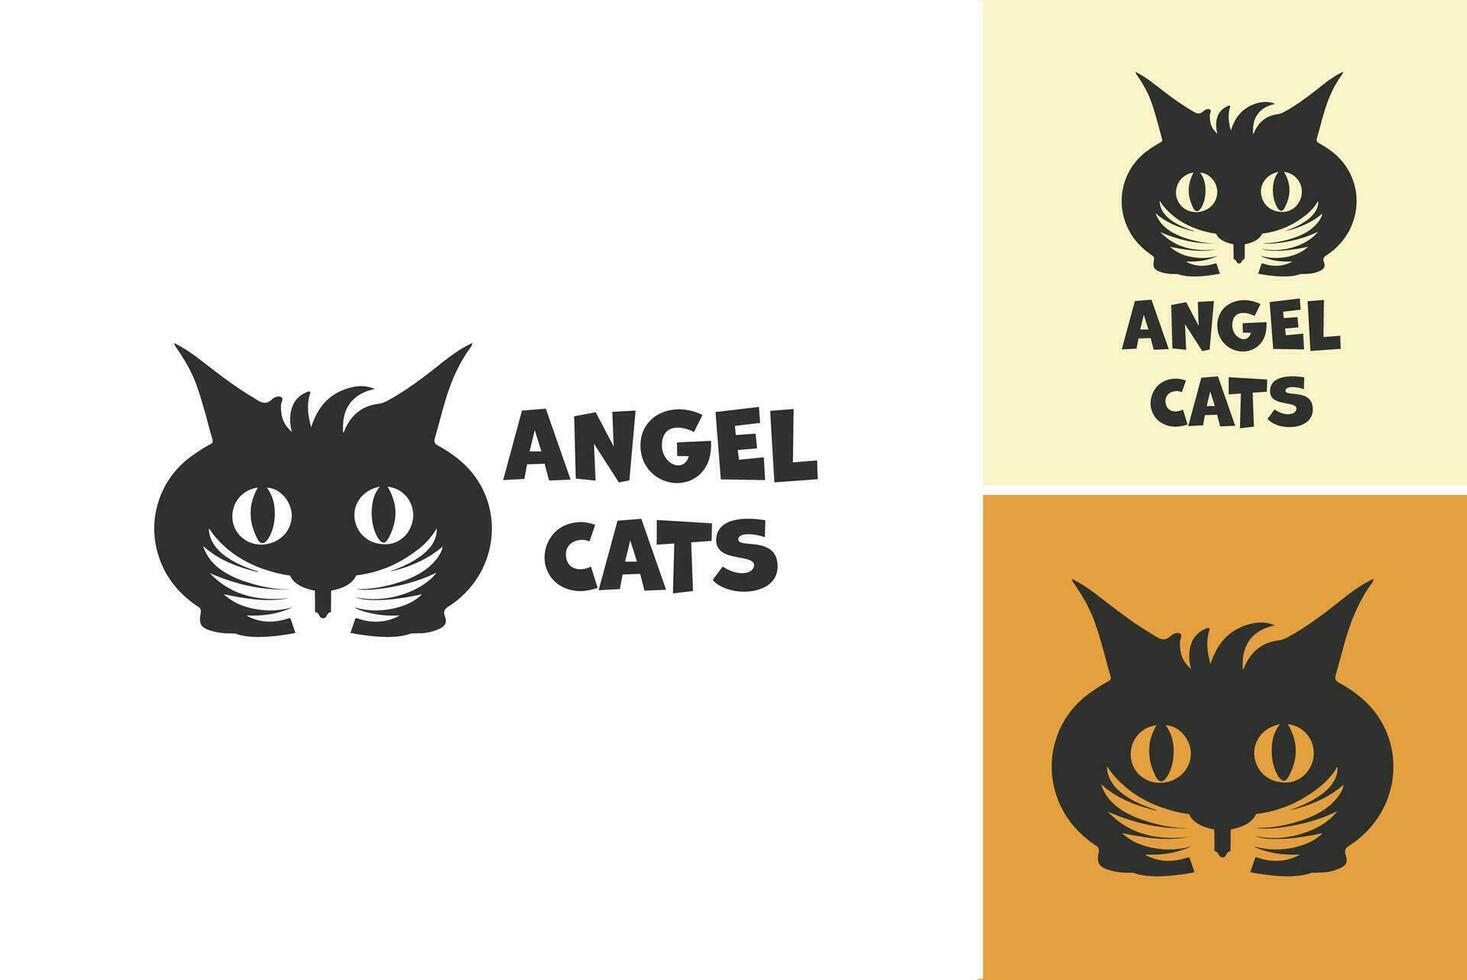 Angel Cats Logo is a title for a design asset depicting a logo featuring cats with angel wings. This asset is suitable for businesses or organizations related to cats, pet care vector